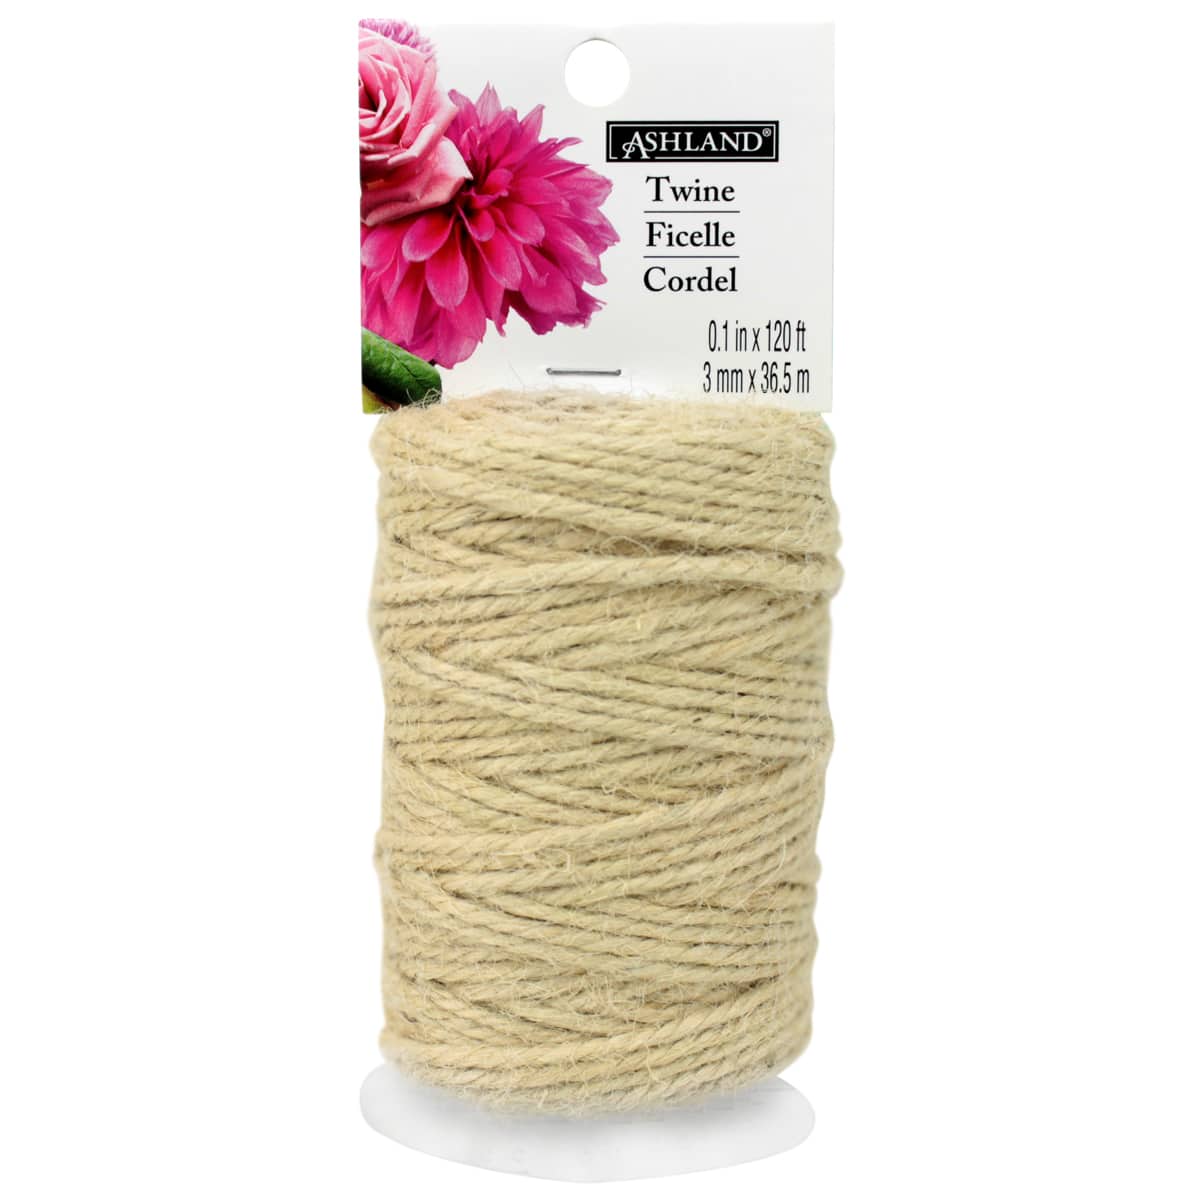 300 Feet Pink and White Bakers Cotton Twine Durable Packing String for Gardening Applications Pink 